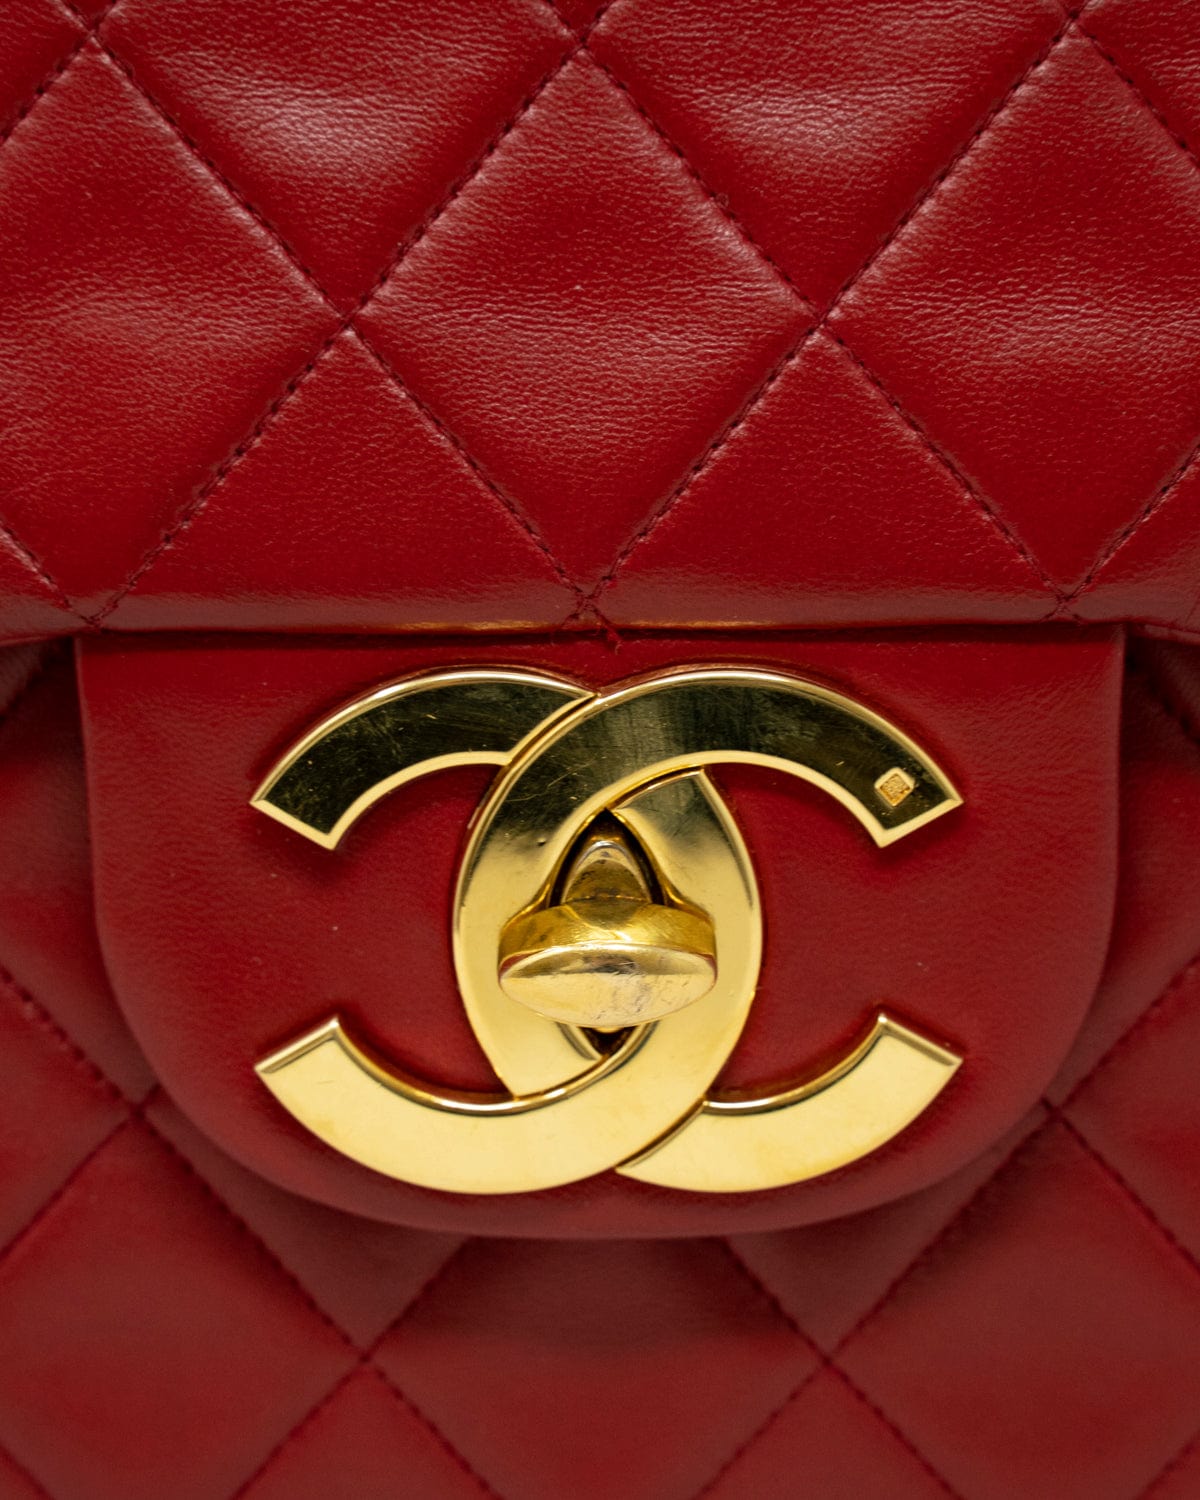 Chanel Vintage Chanel Red Maxi Classic Single Flap Bag - ASL2413